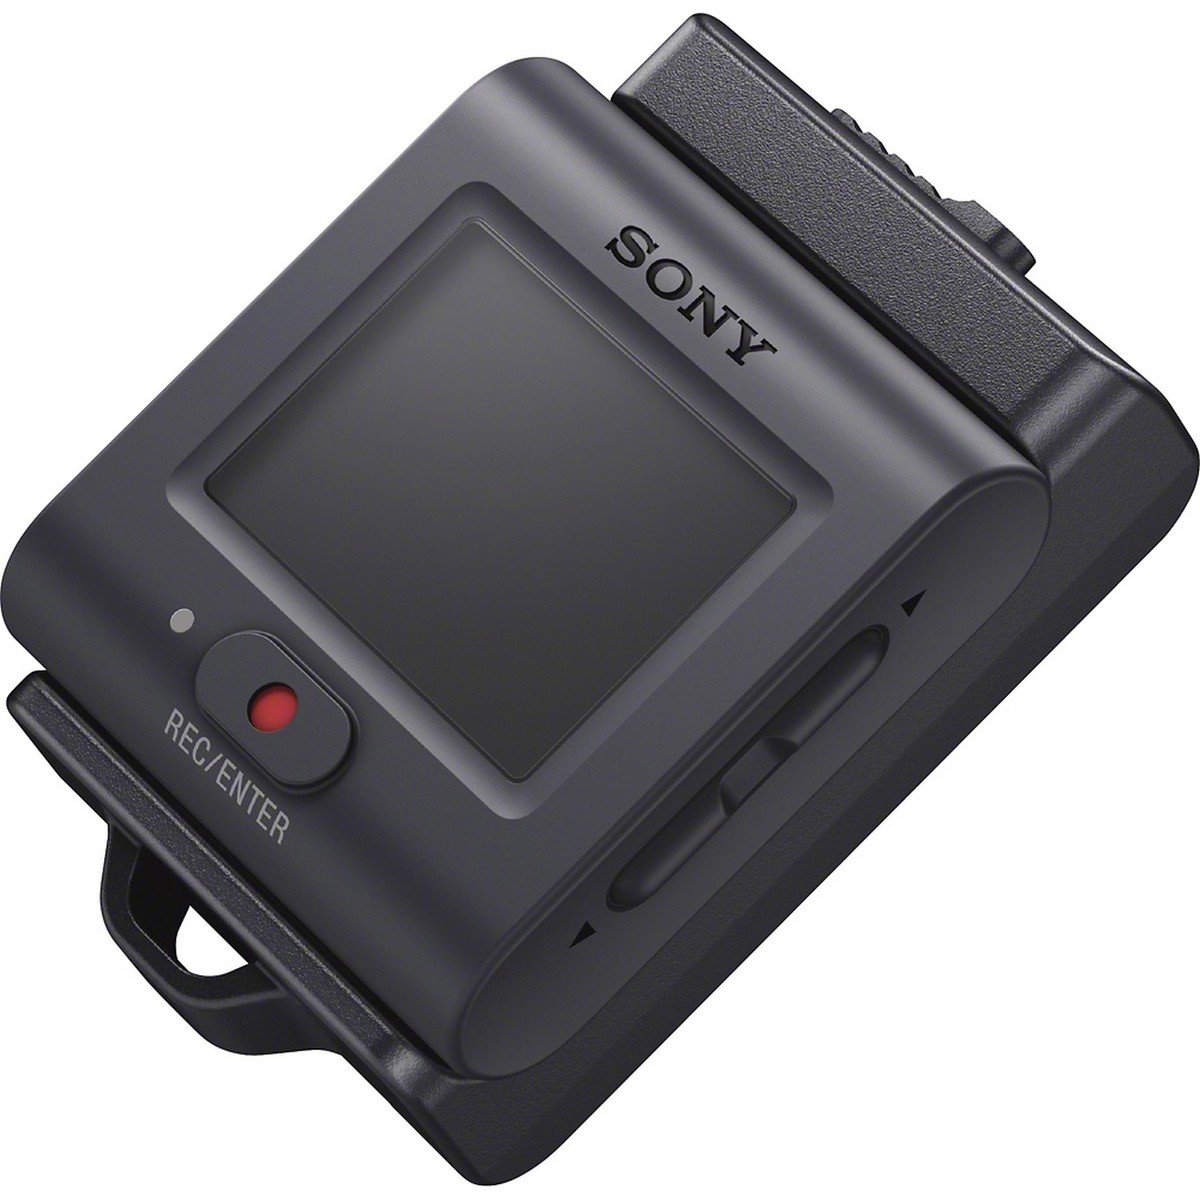 Sony Action Camera HDR-AS50 + Live View Remote